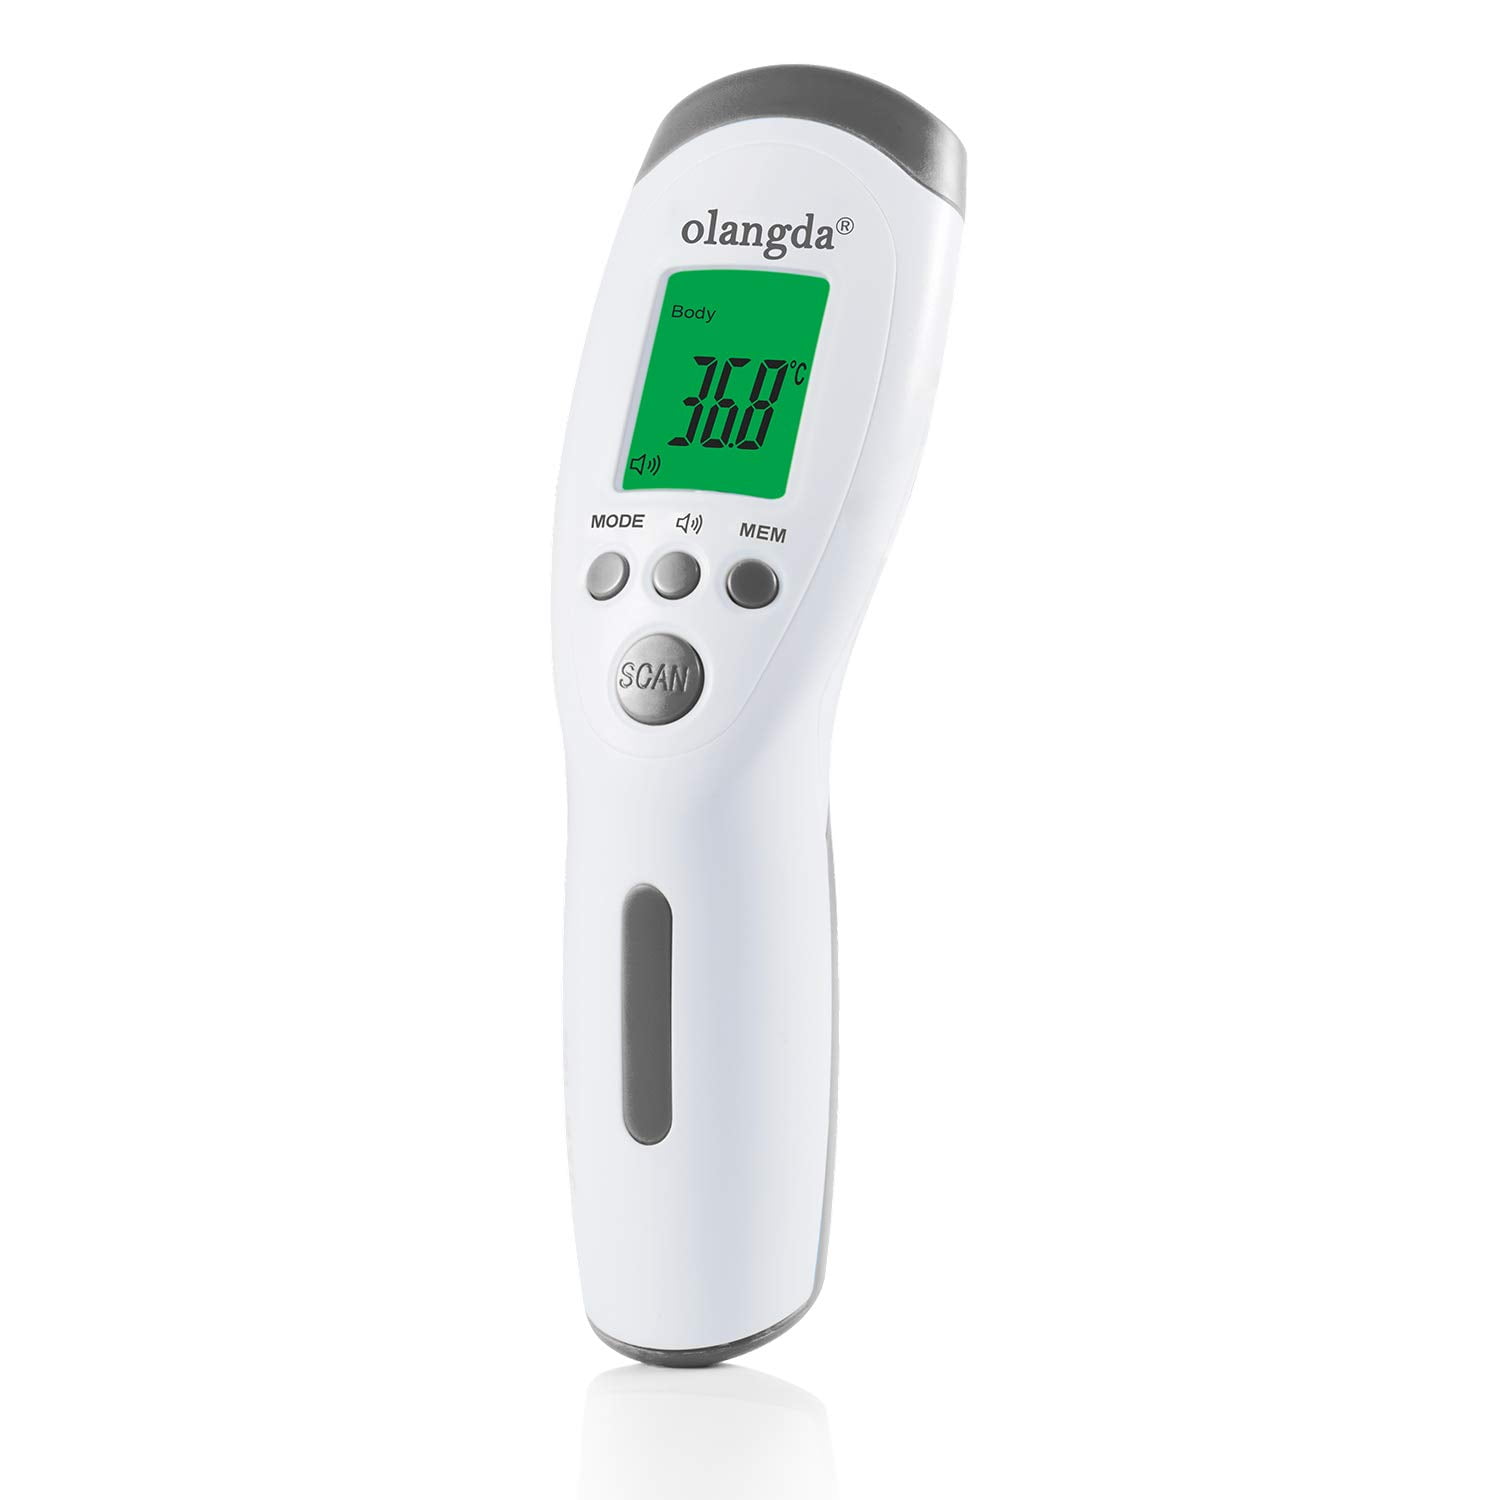 THE-294 Digital 2-in-1 Body Surface Thermometer Forehead Human